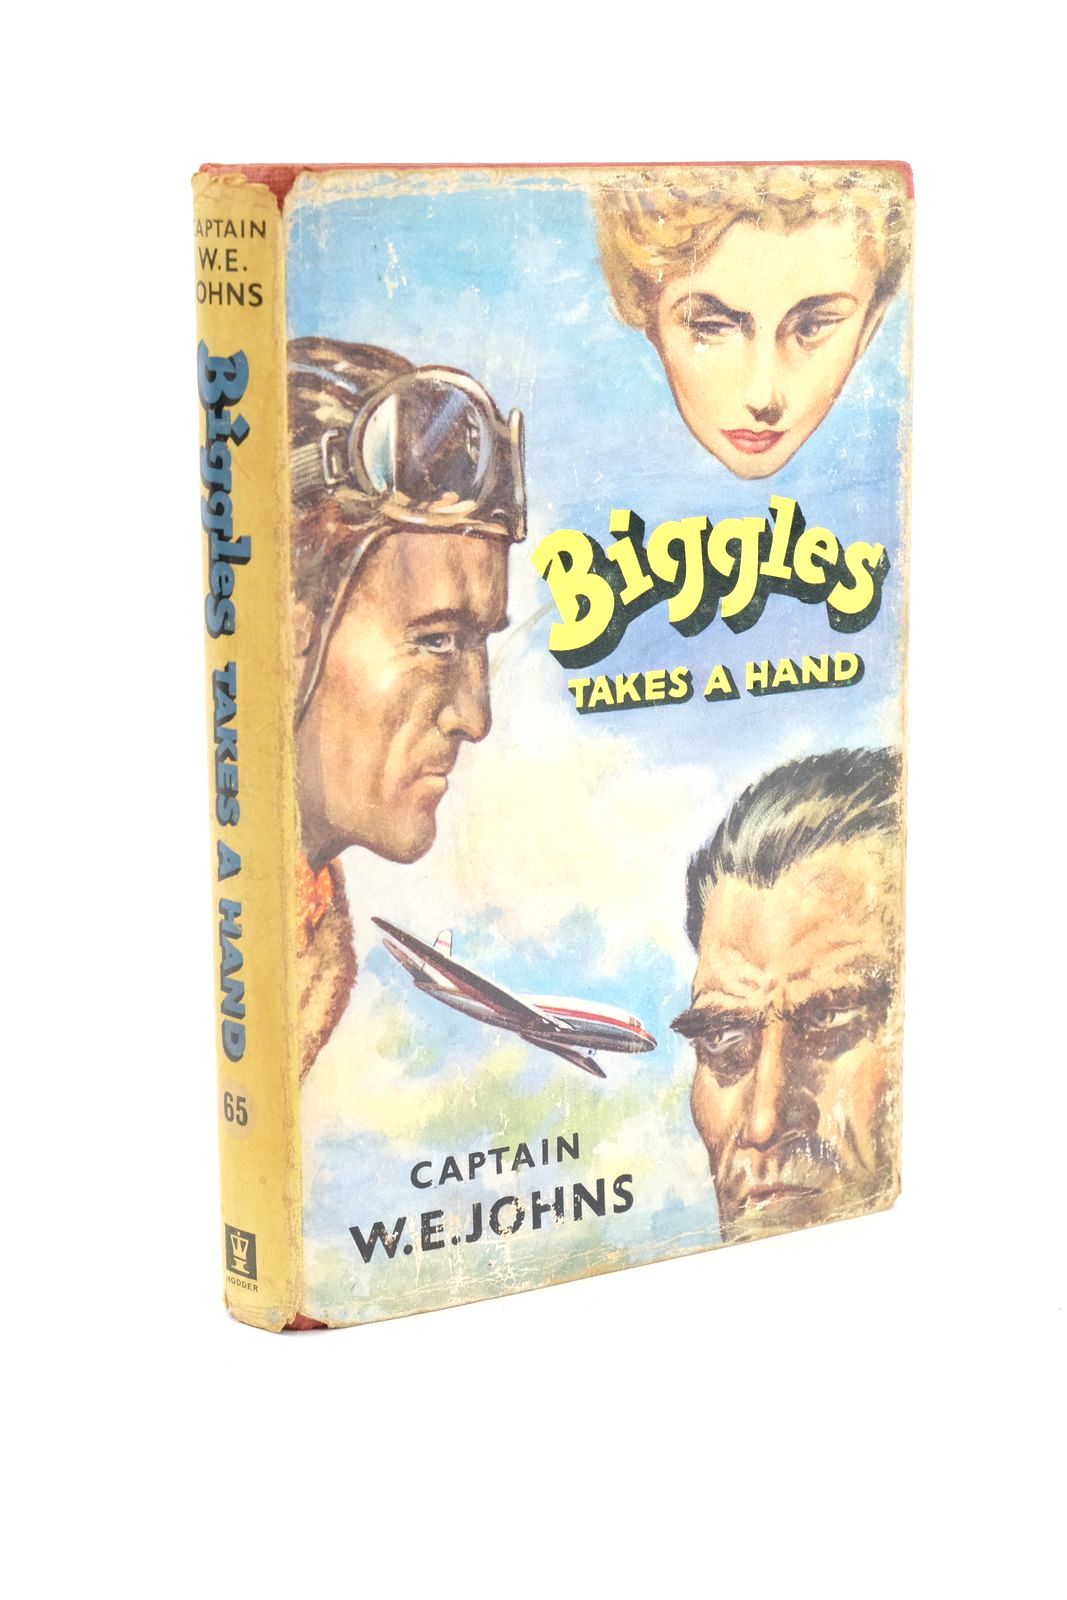 Photo of BIGGLES TAKES A HAND written by Johns, W.E. illustrated by Stead,  published by Hodder &amp; Stoughton (STOCK CODE: 1323927)  for sale by Stella & Rose's Books